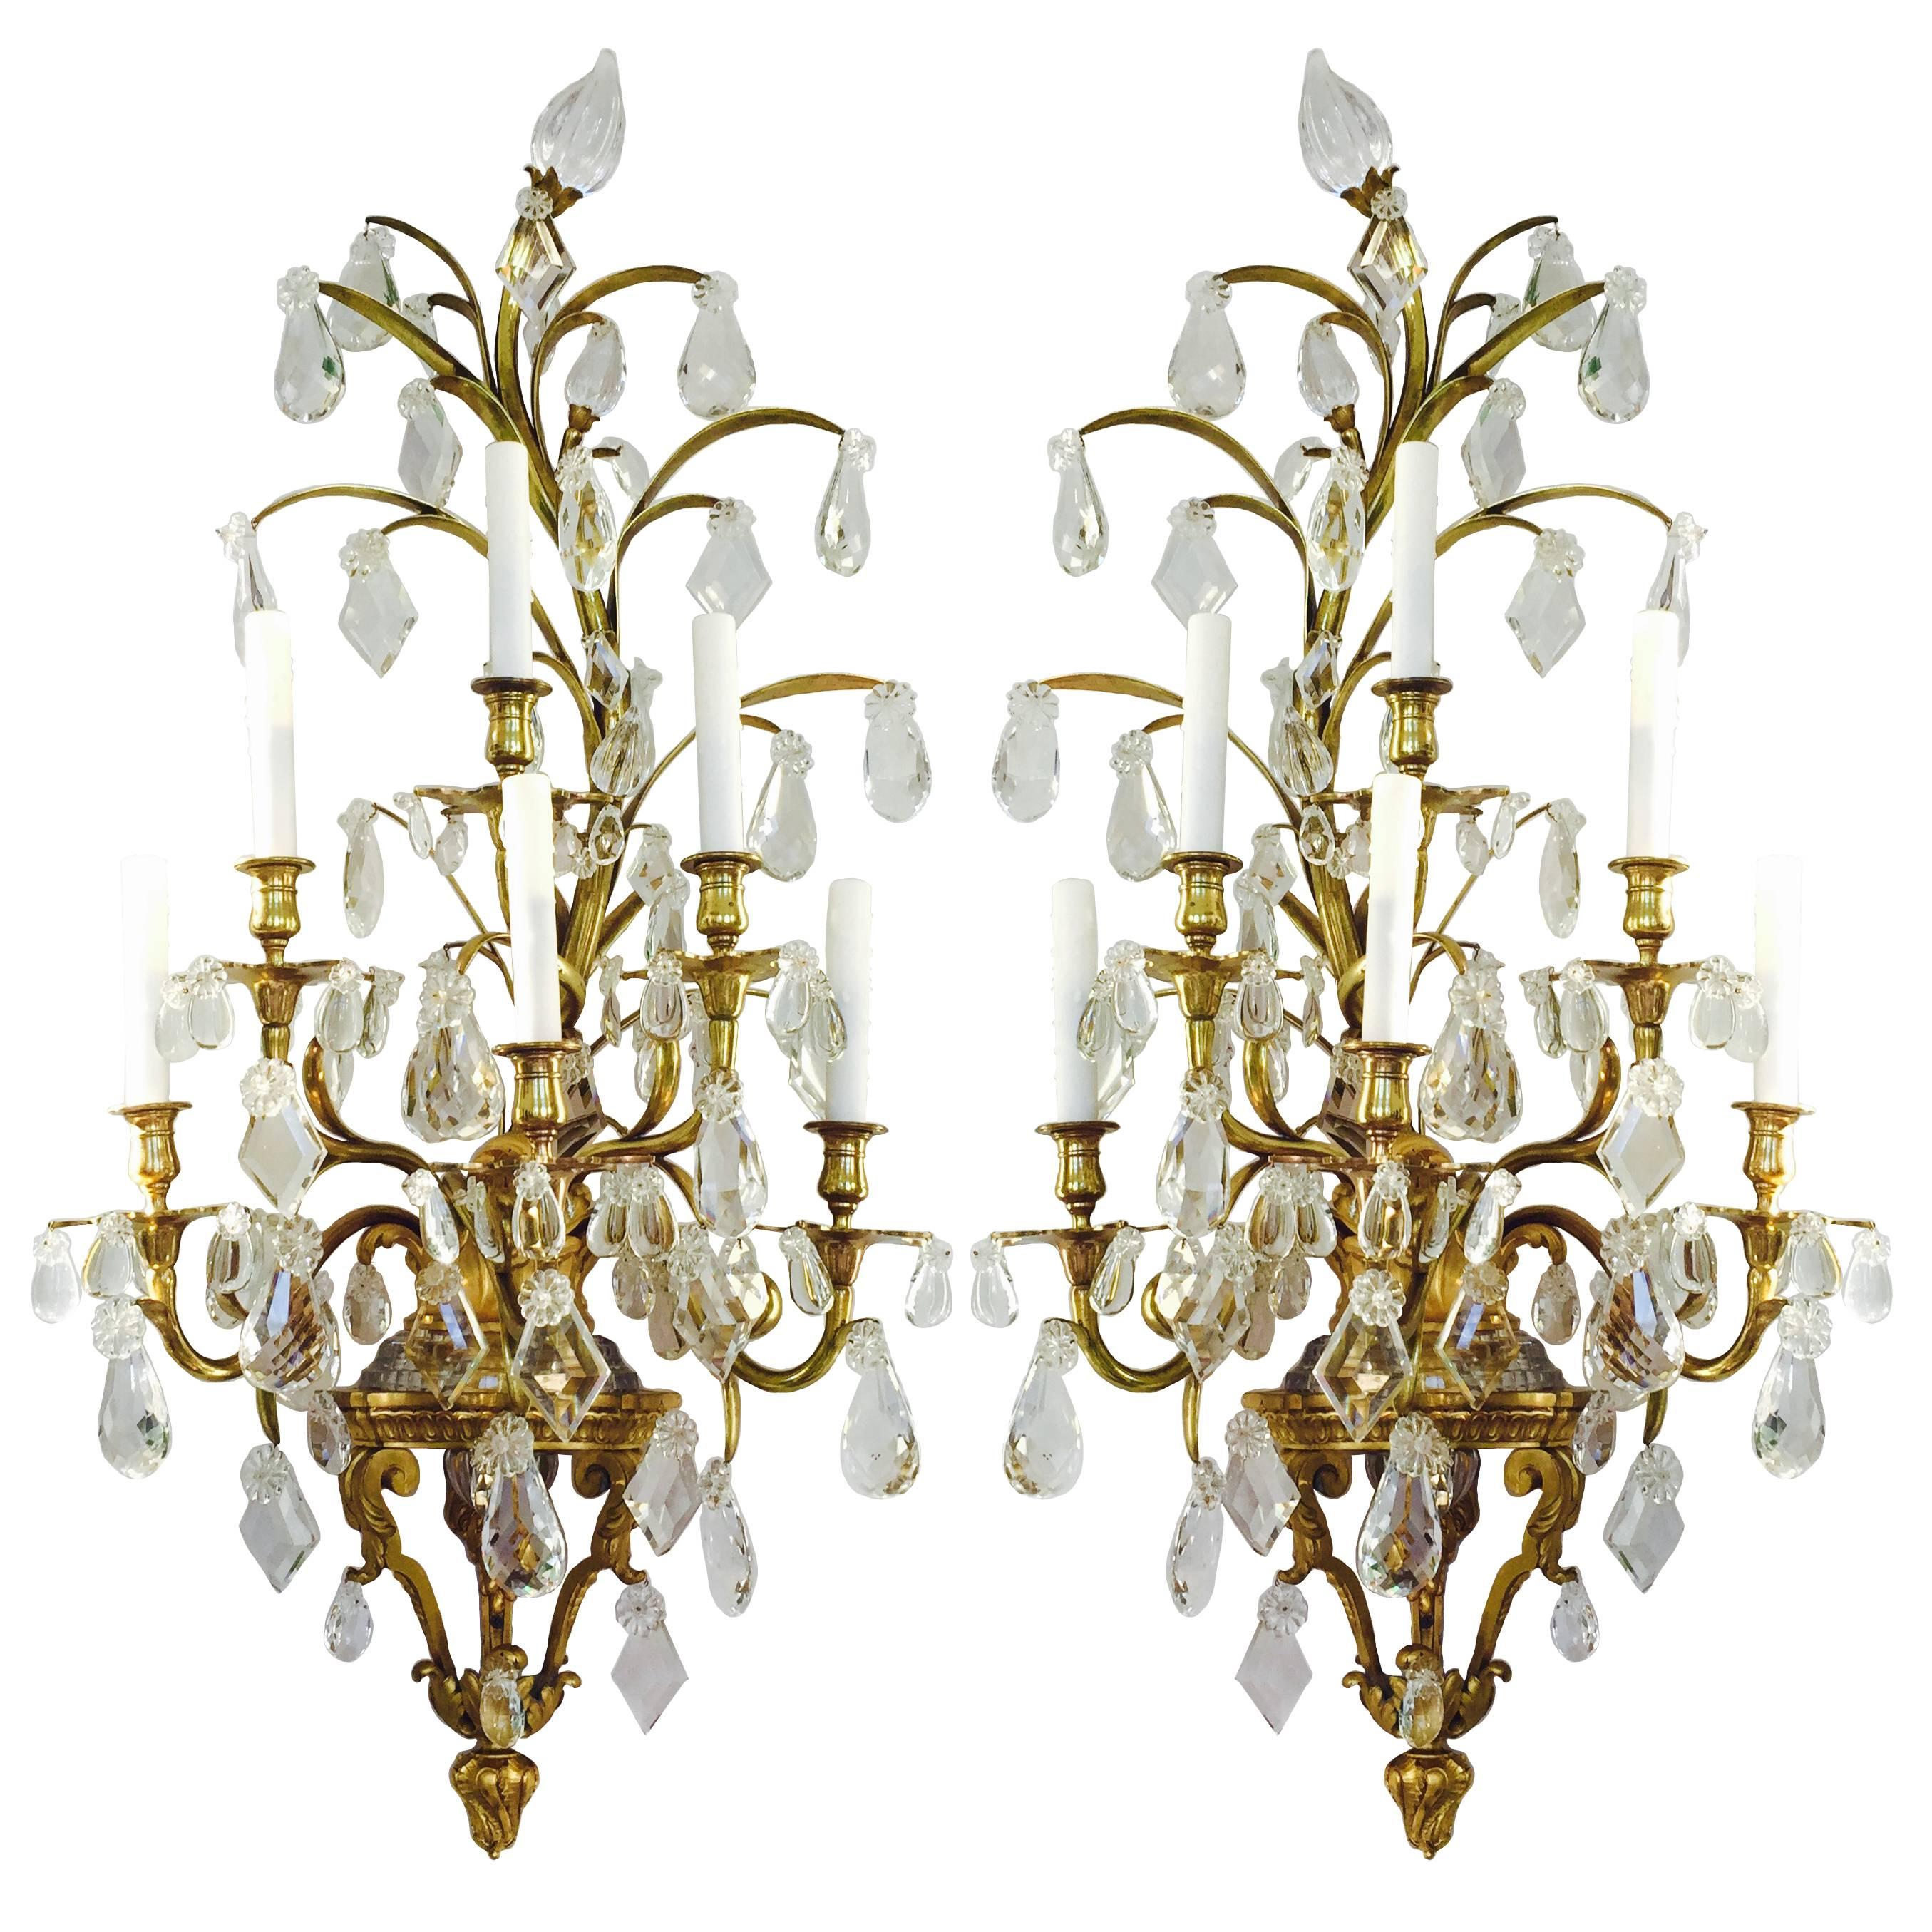  Baccarat Attributed Wall Sconces  